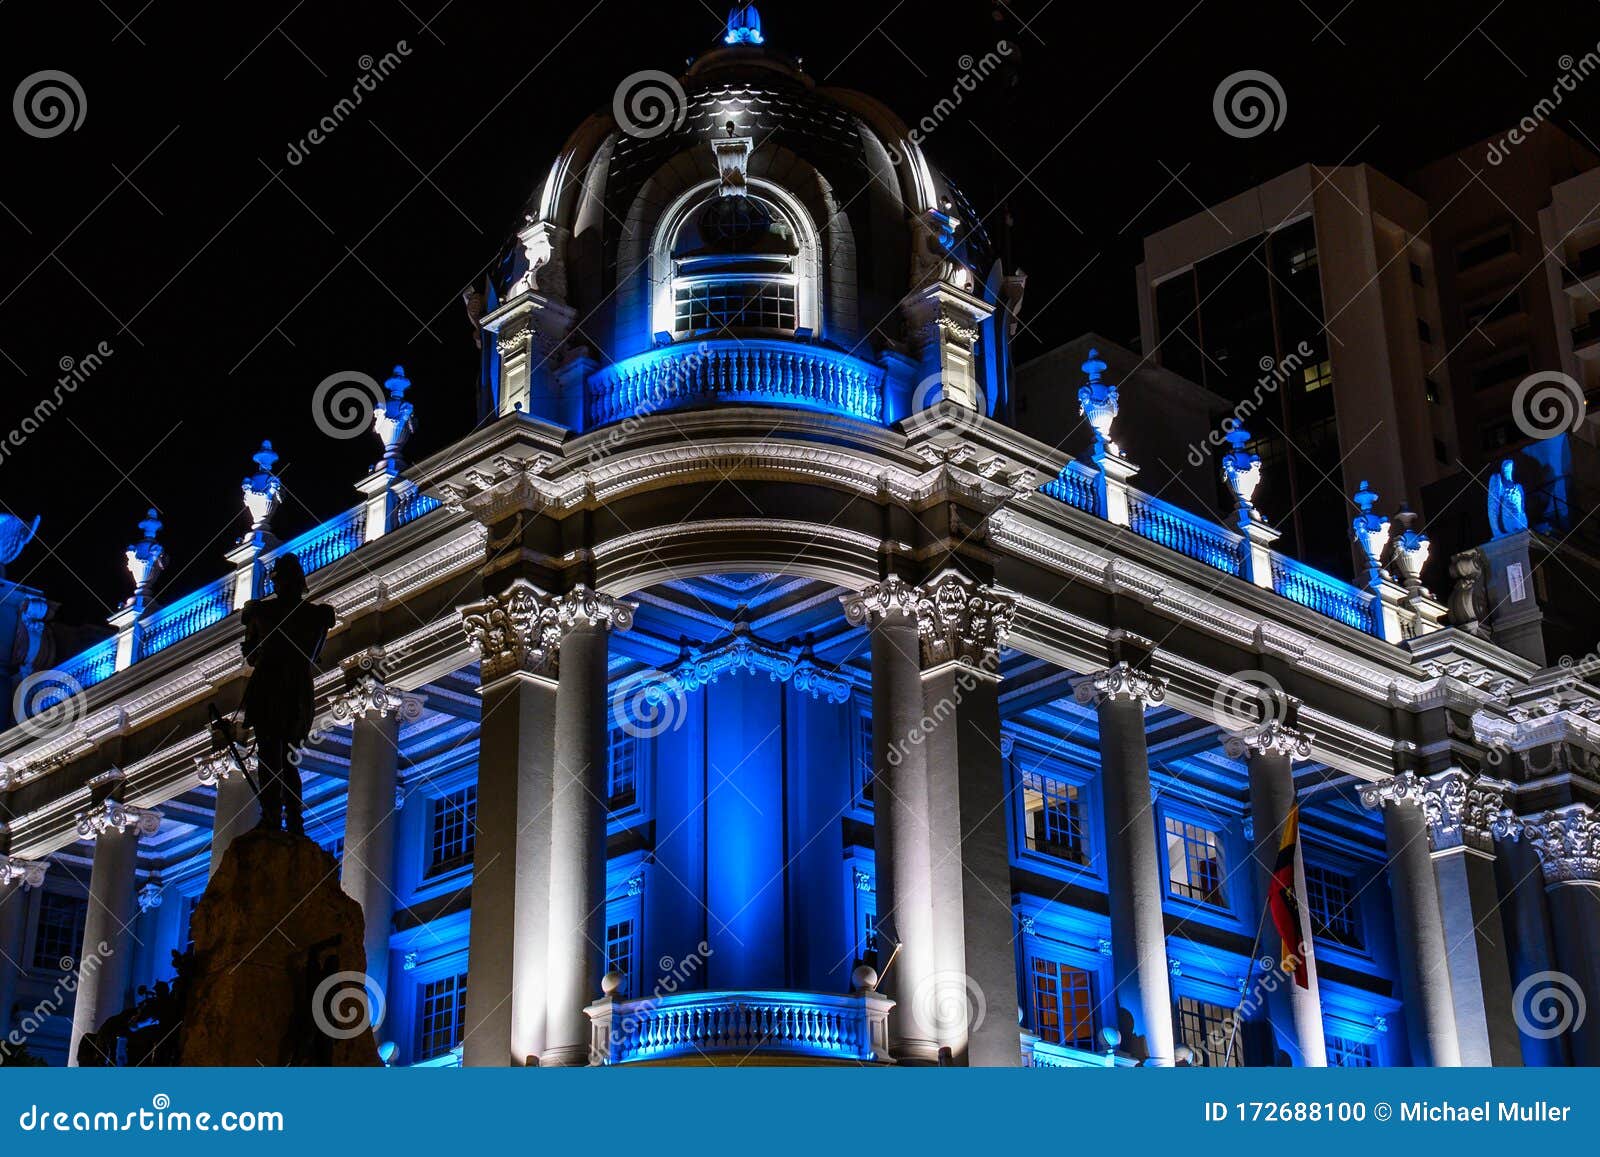 night scene of guayaquil town hall